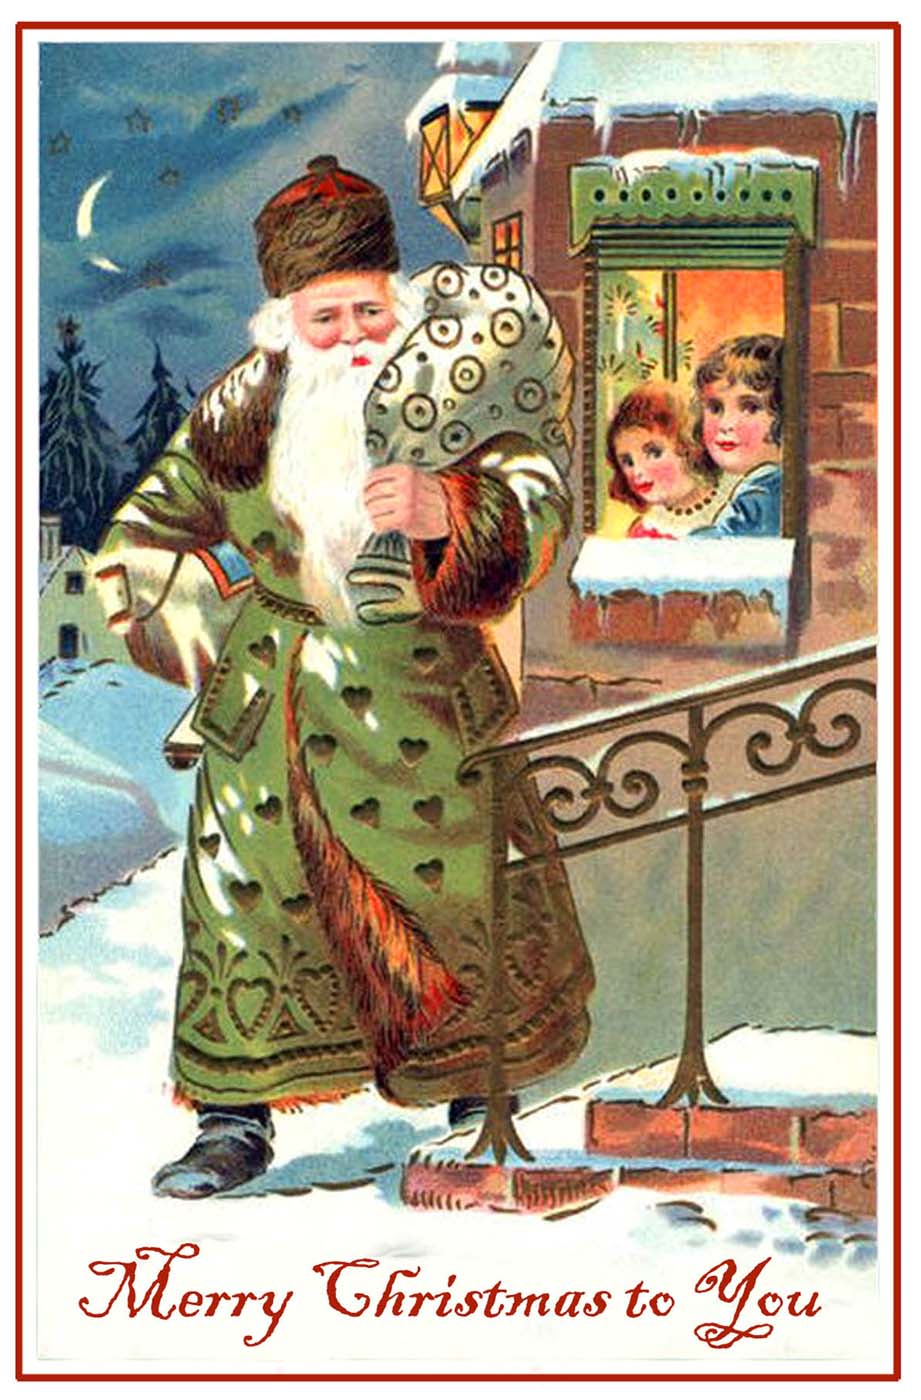 Christmas post card of a green clad Santa Claus with children looking at him through a window